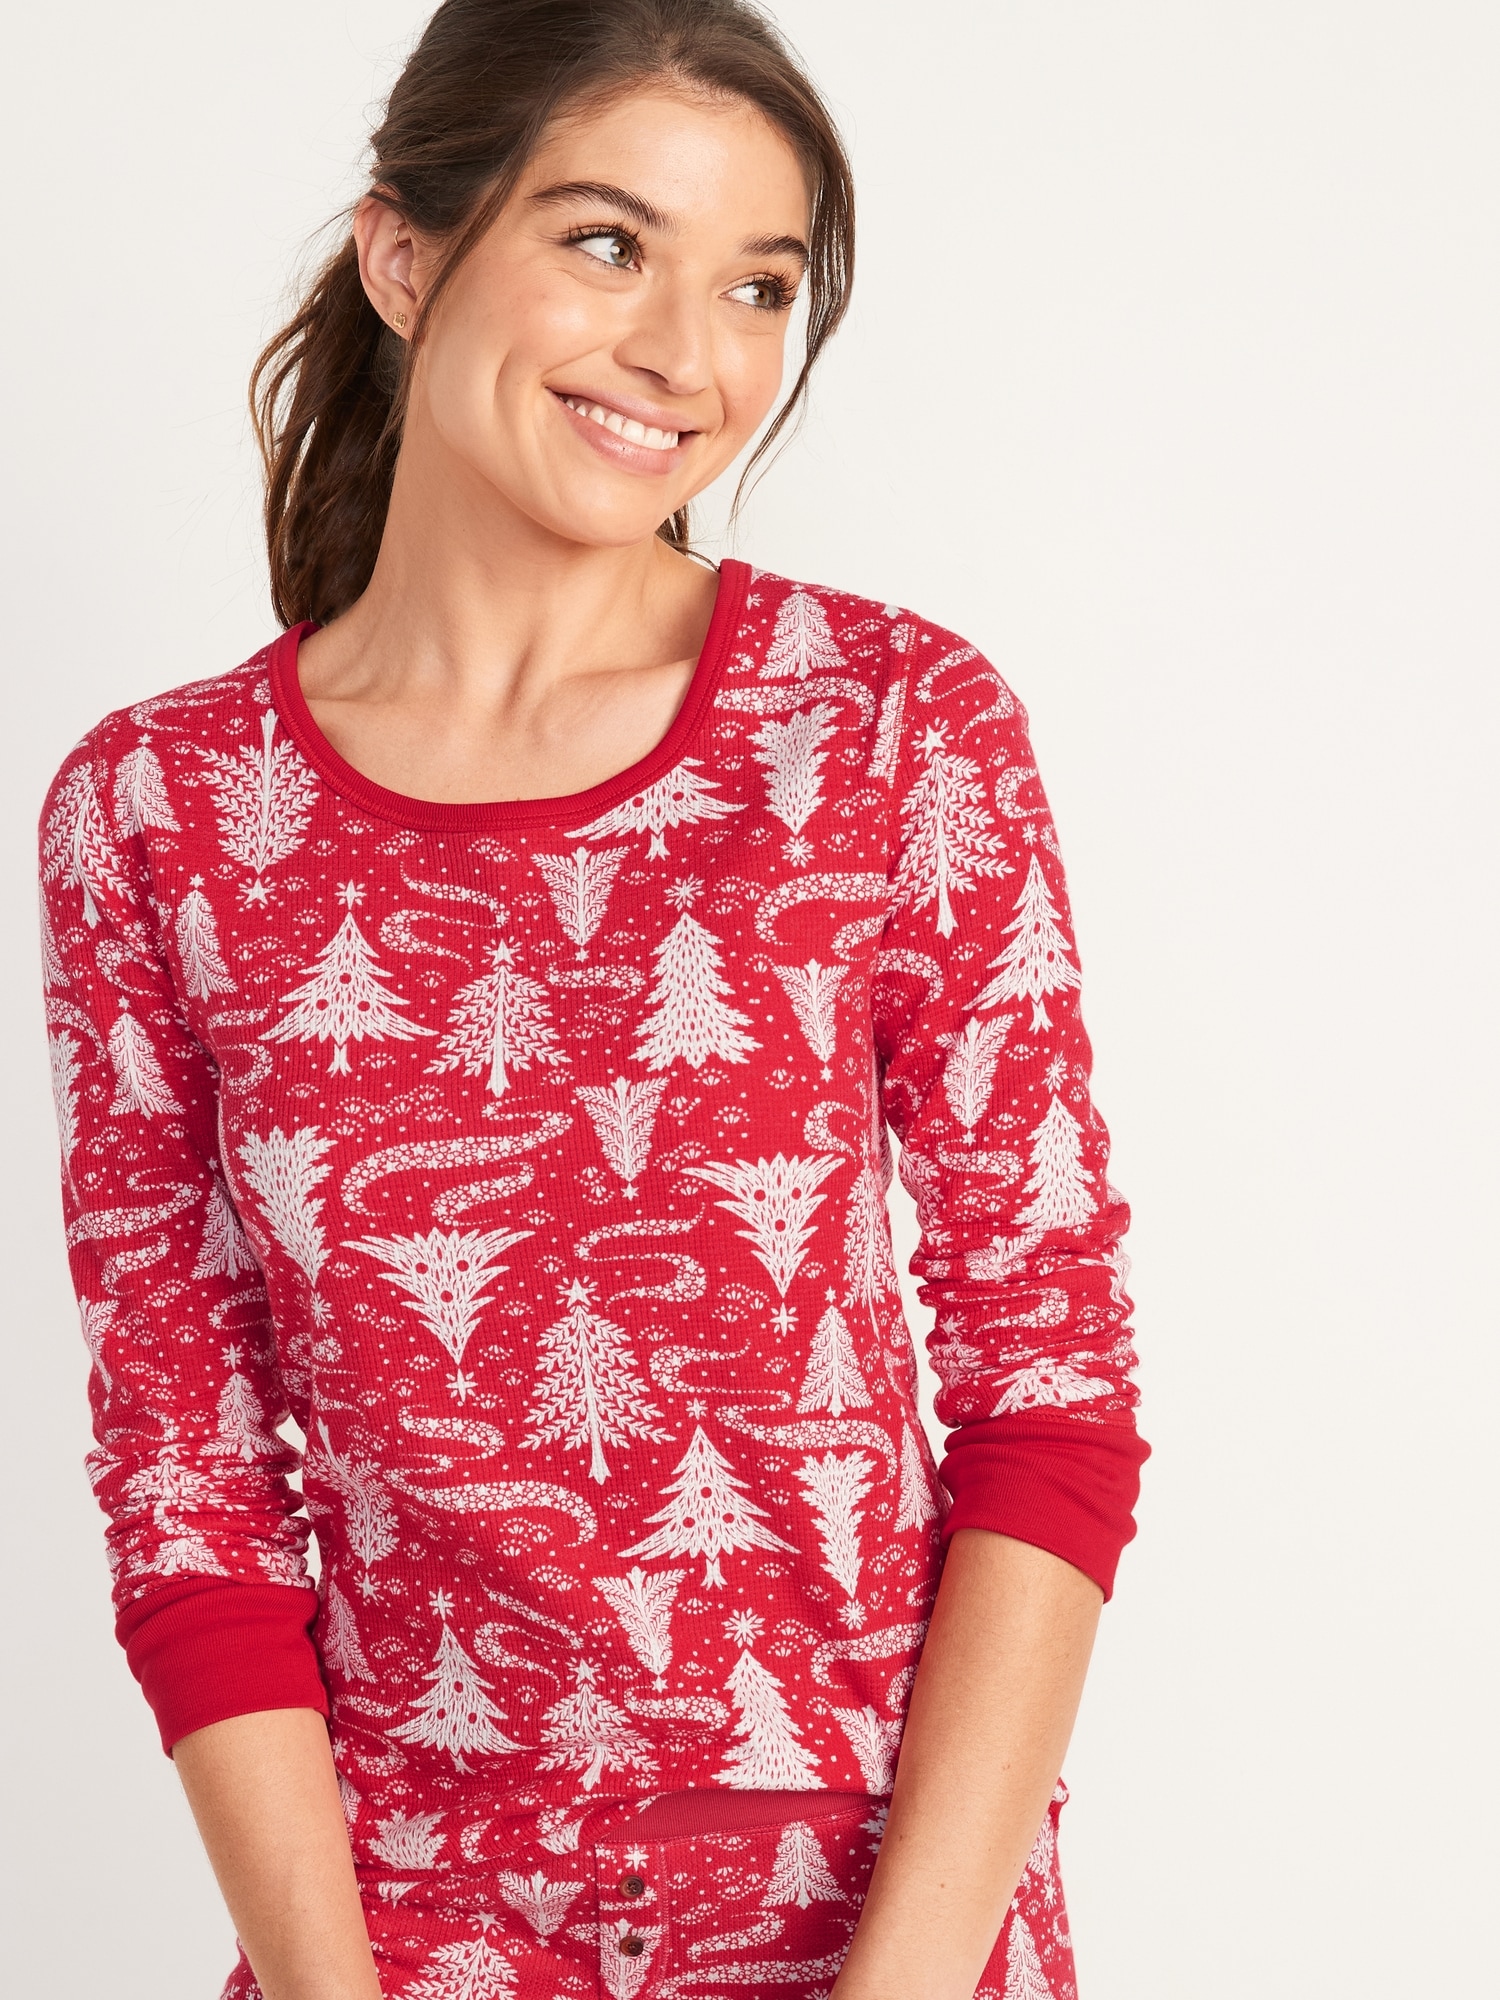 Matching Printed Thermal-Knit Long-Sleeve Pajama Top for Women | Old Navy